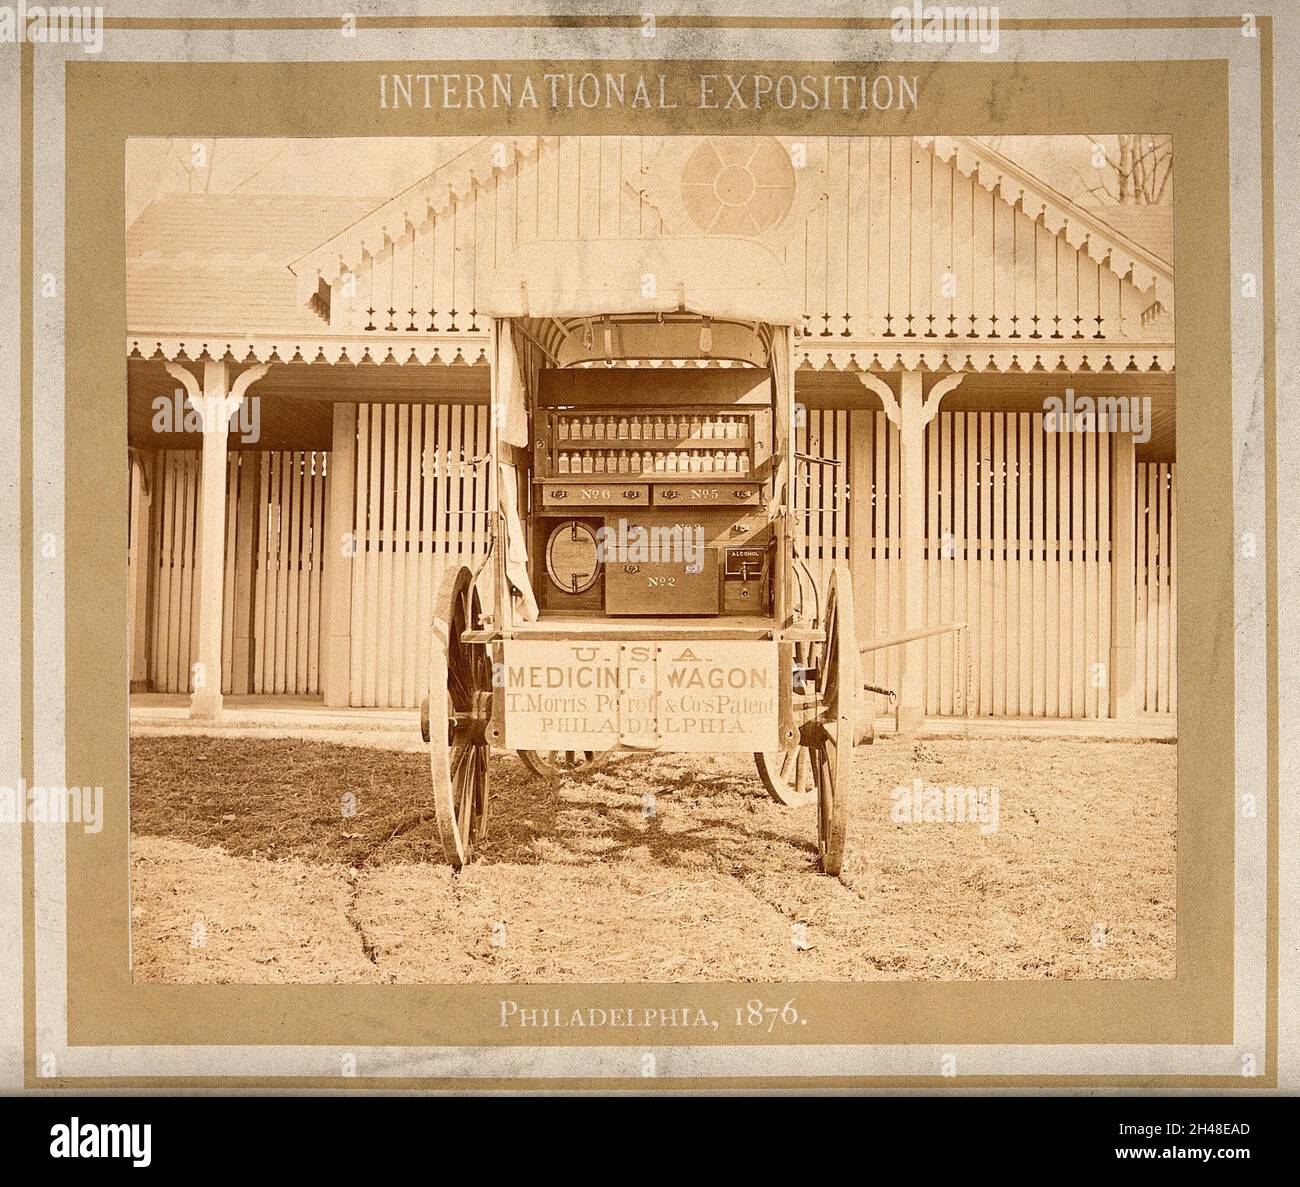 Philadelphia International Exposition, 1876: American Civil War medicine wagon produced by T. Morris Perot and Company. Photograph, 1876. Stock Photo